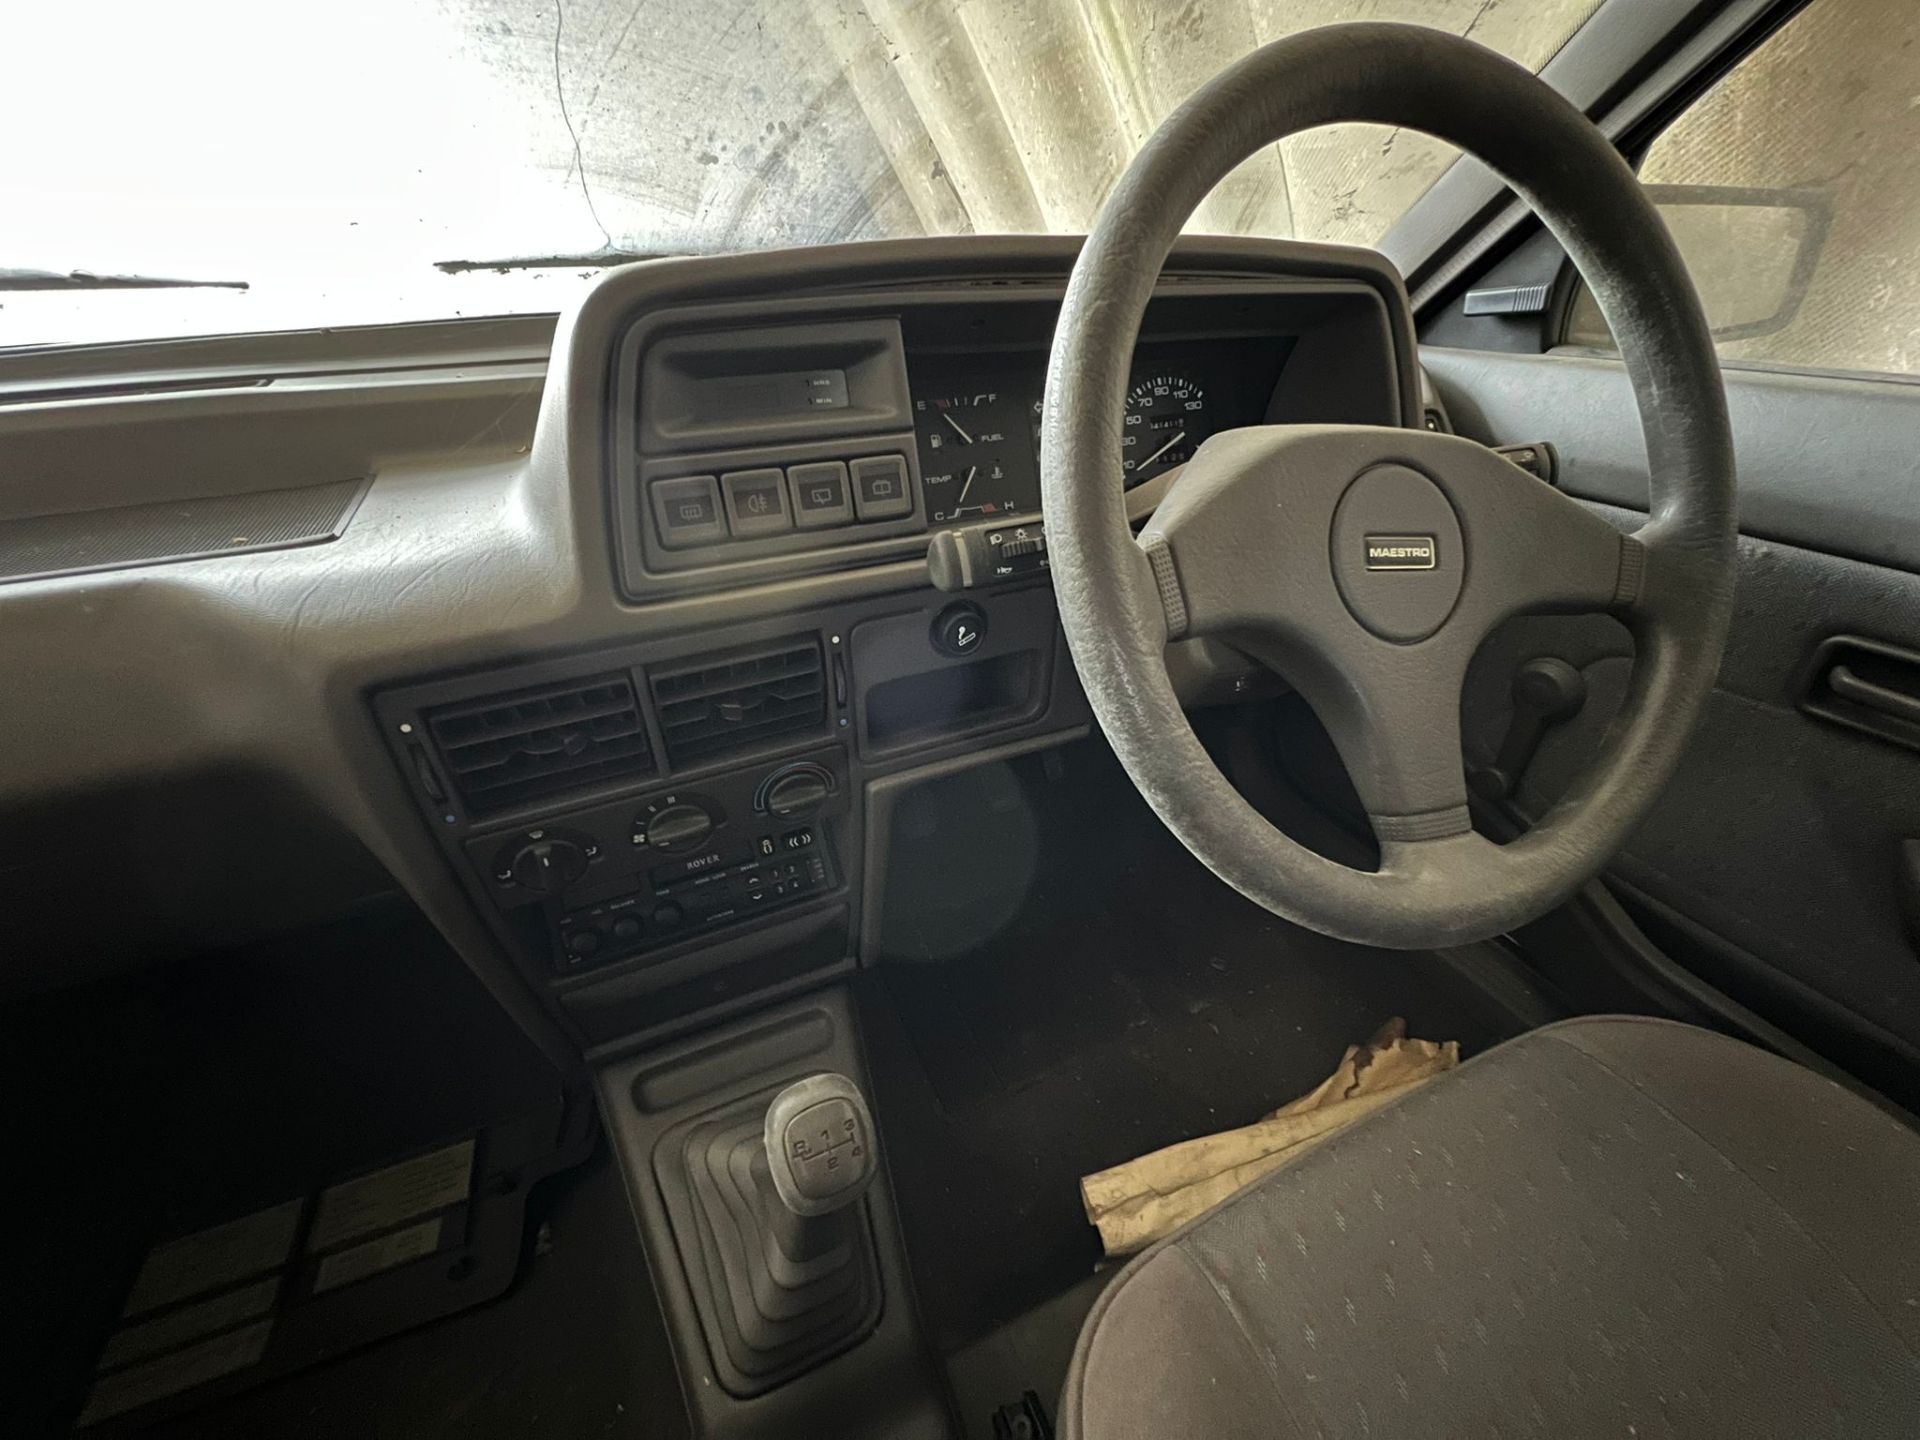 Rover Maestro Clubman 1993 Barn Find - Image 5 of 11